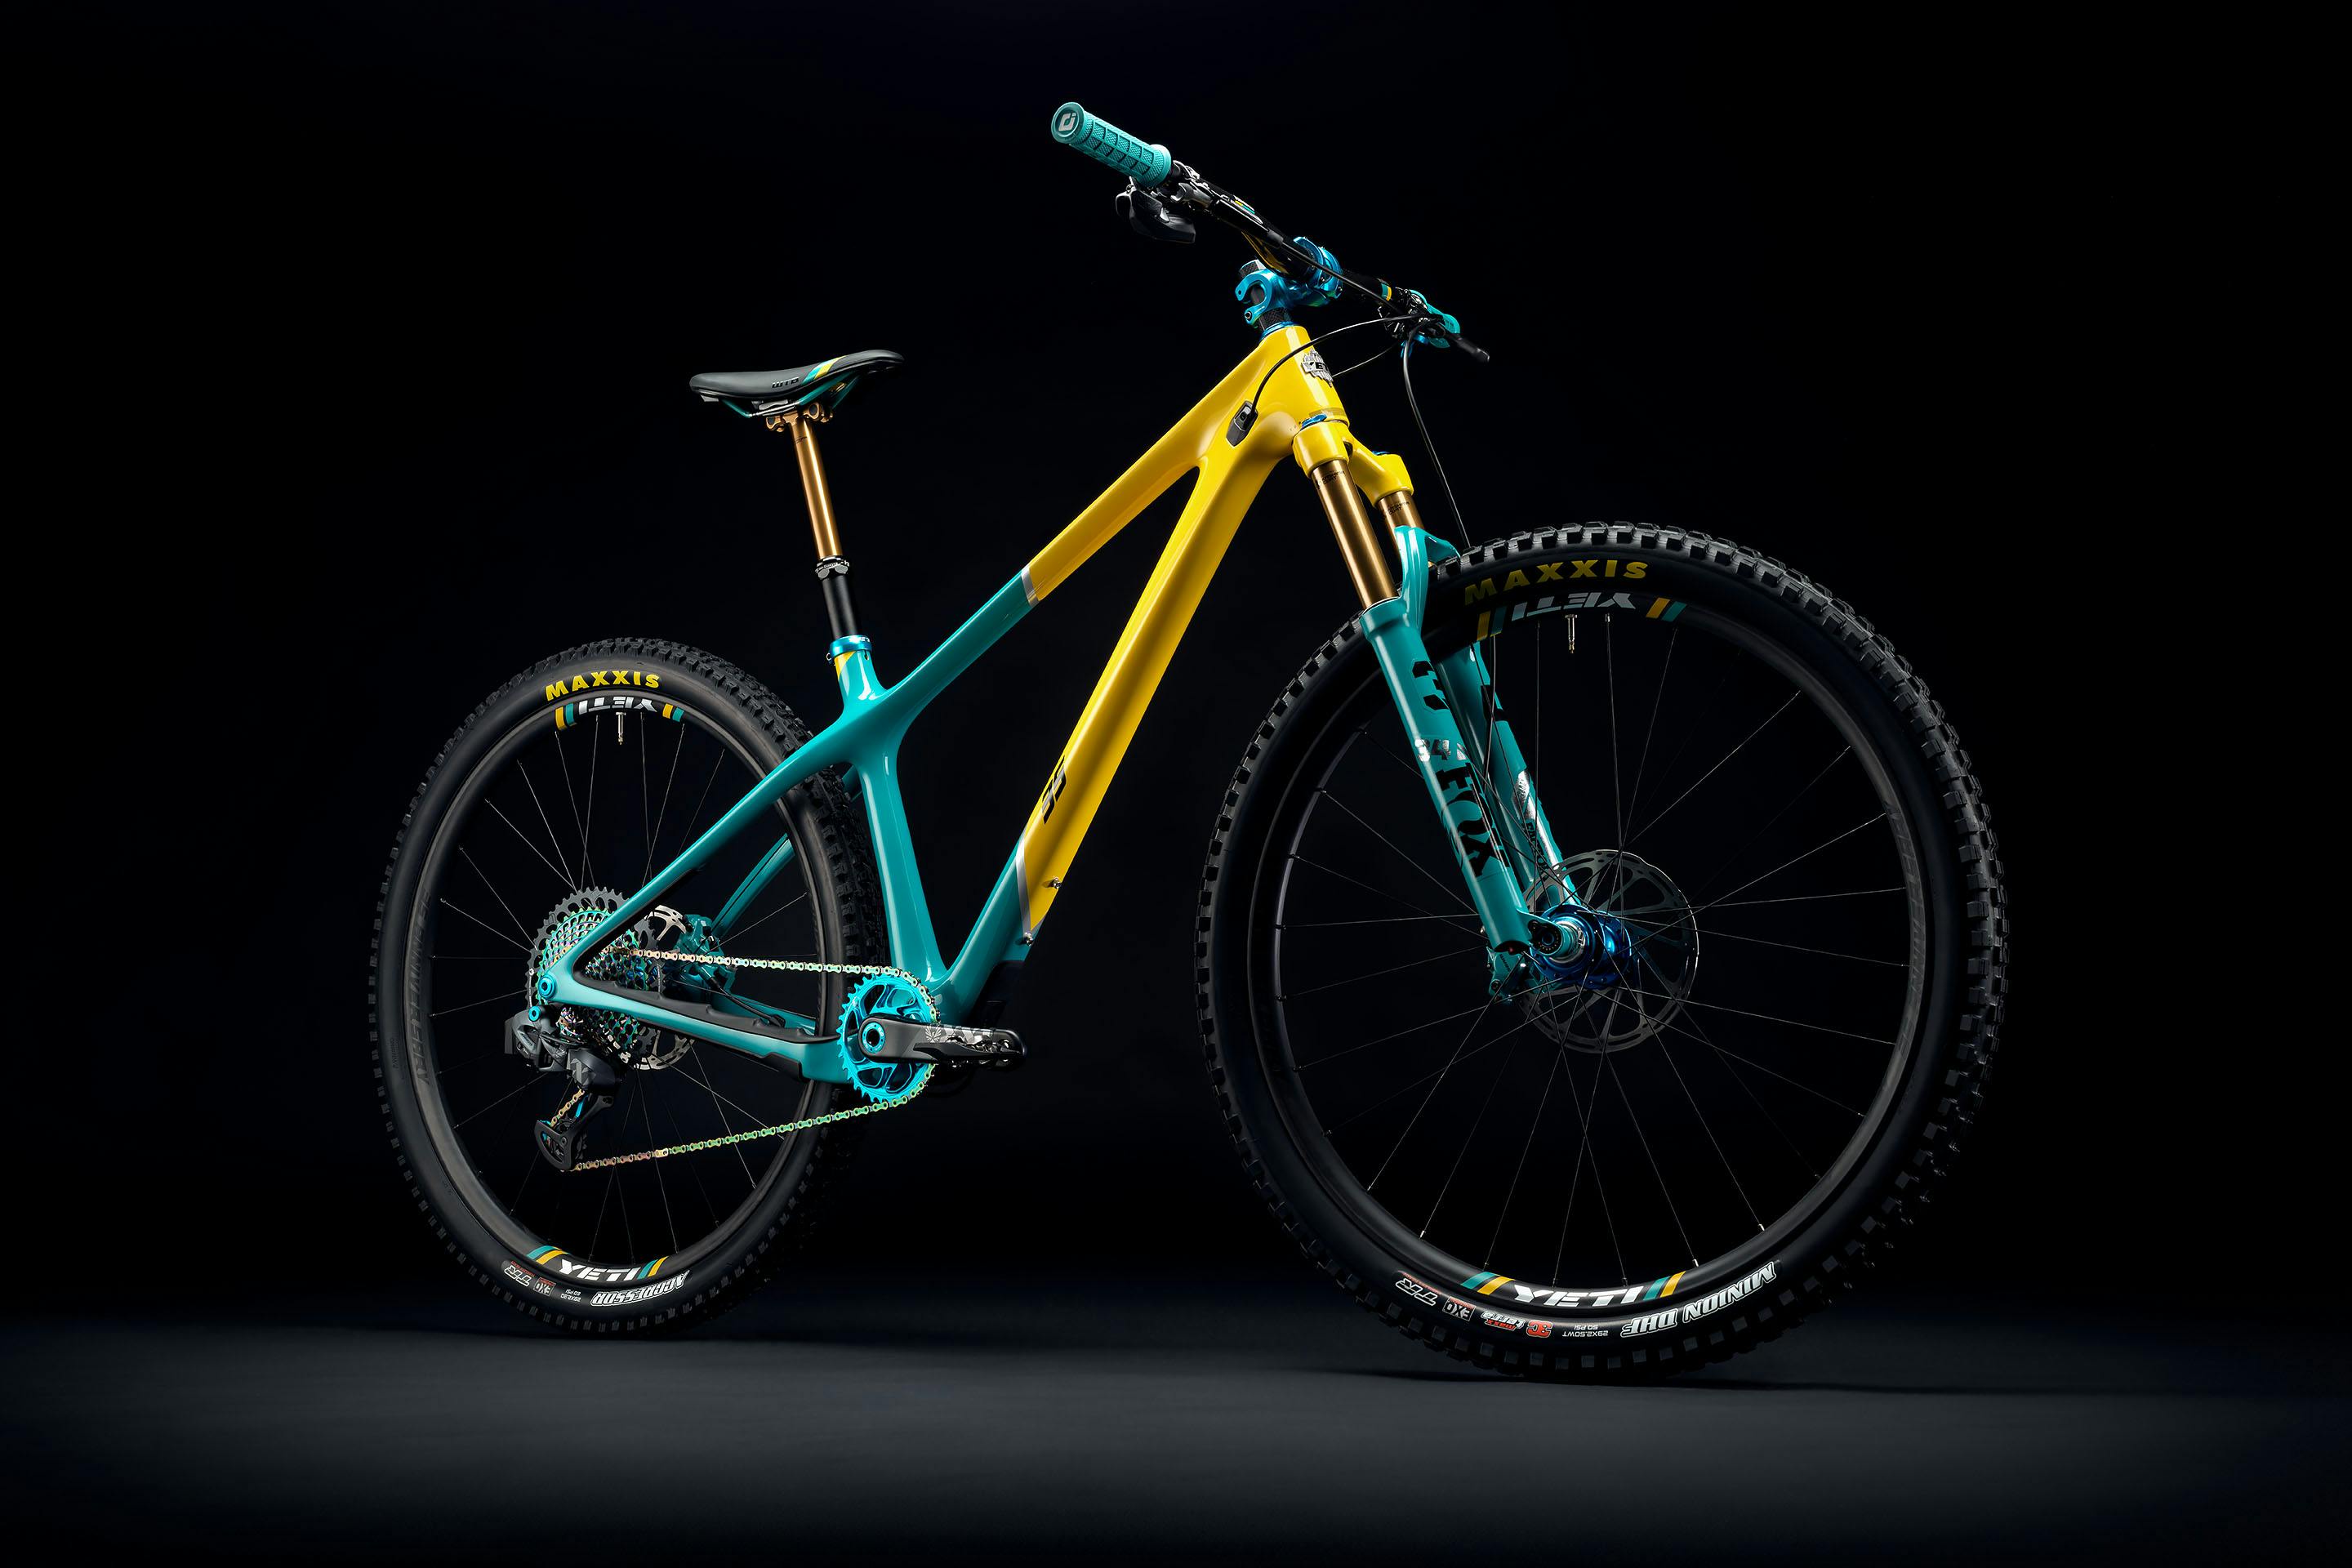 Yeti ARC Review — The WellKnown Hardtail Returns in Style